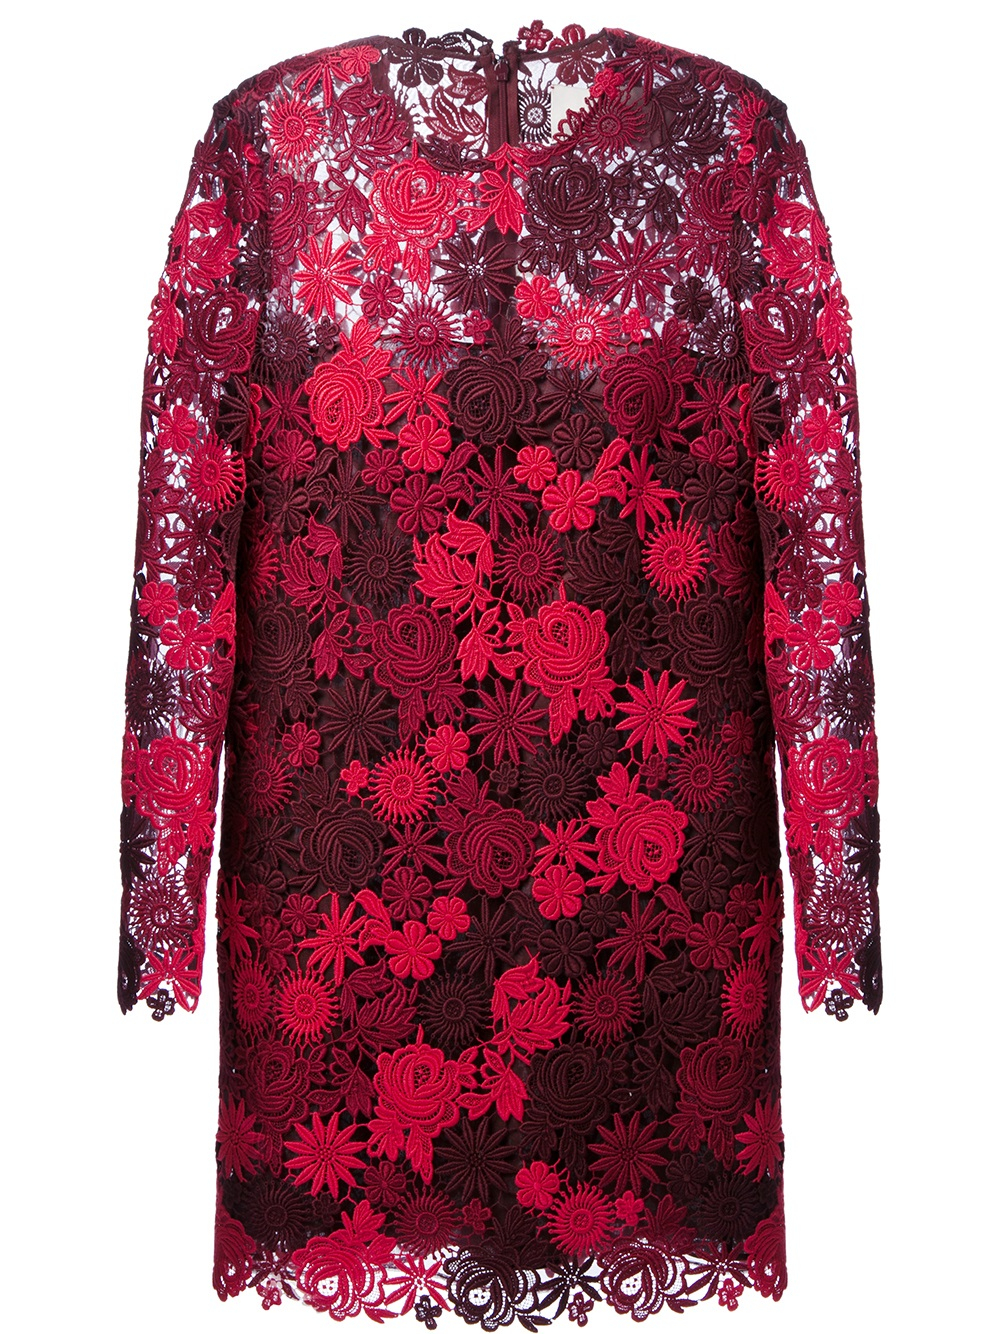 Valentino Floral Embroidered Dress in Red | Lyst